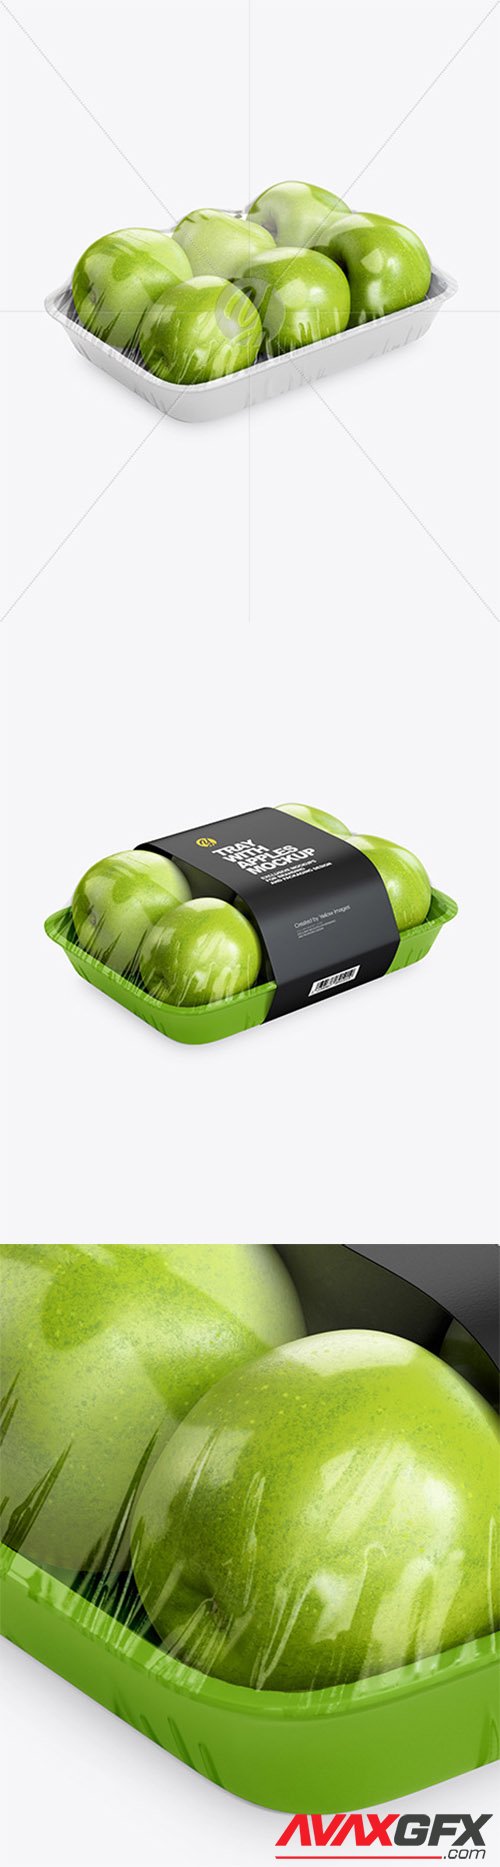 Tray with Green Apples Mockup 79257 TIF